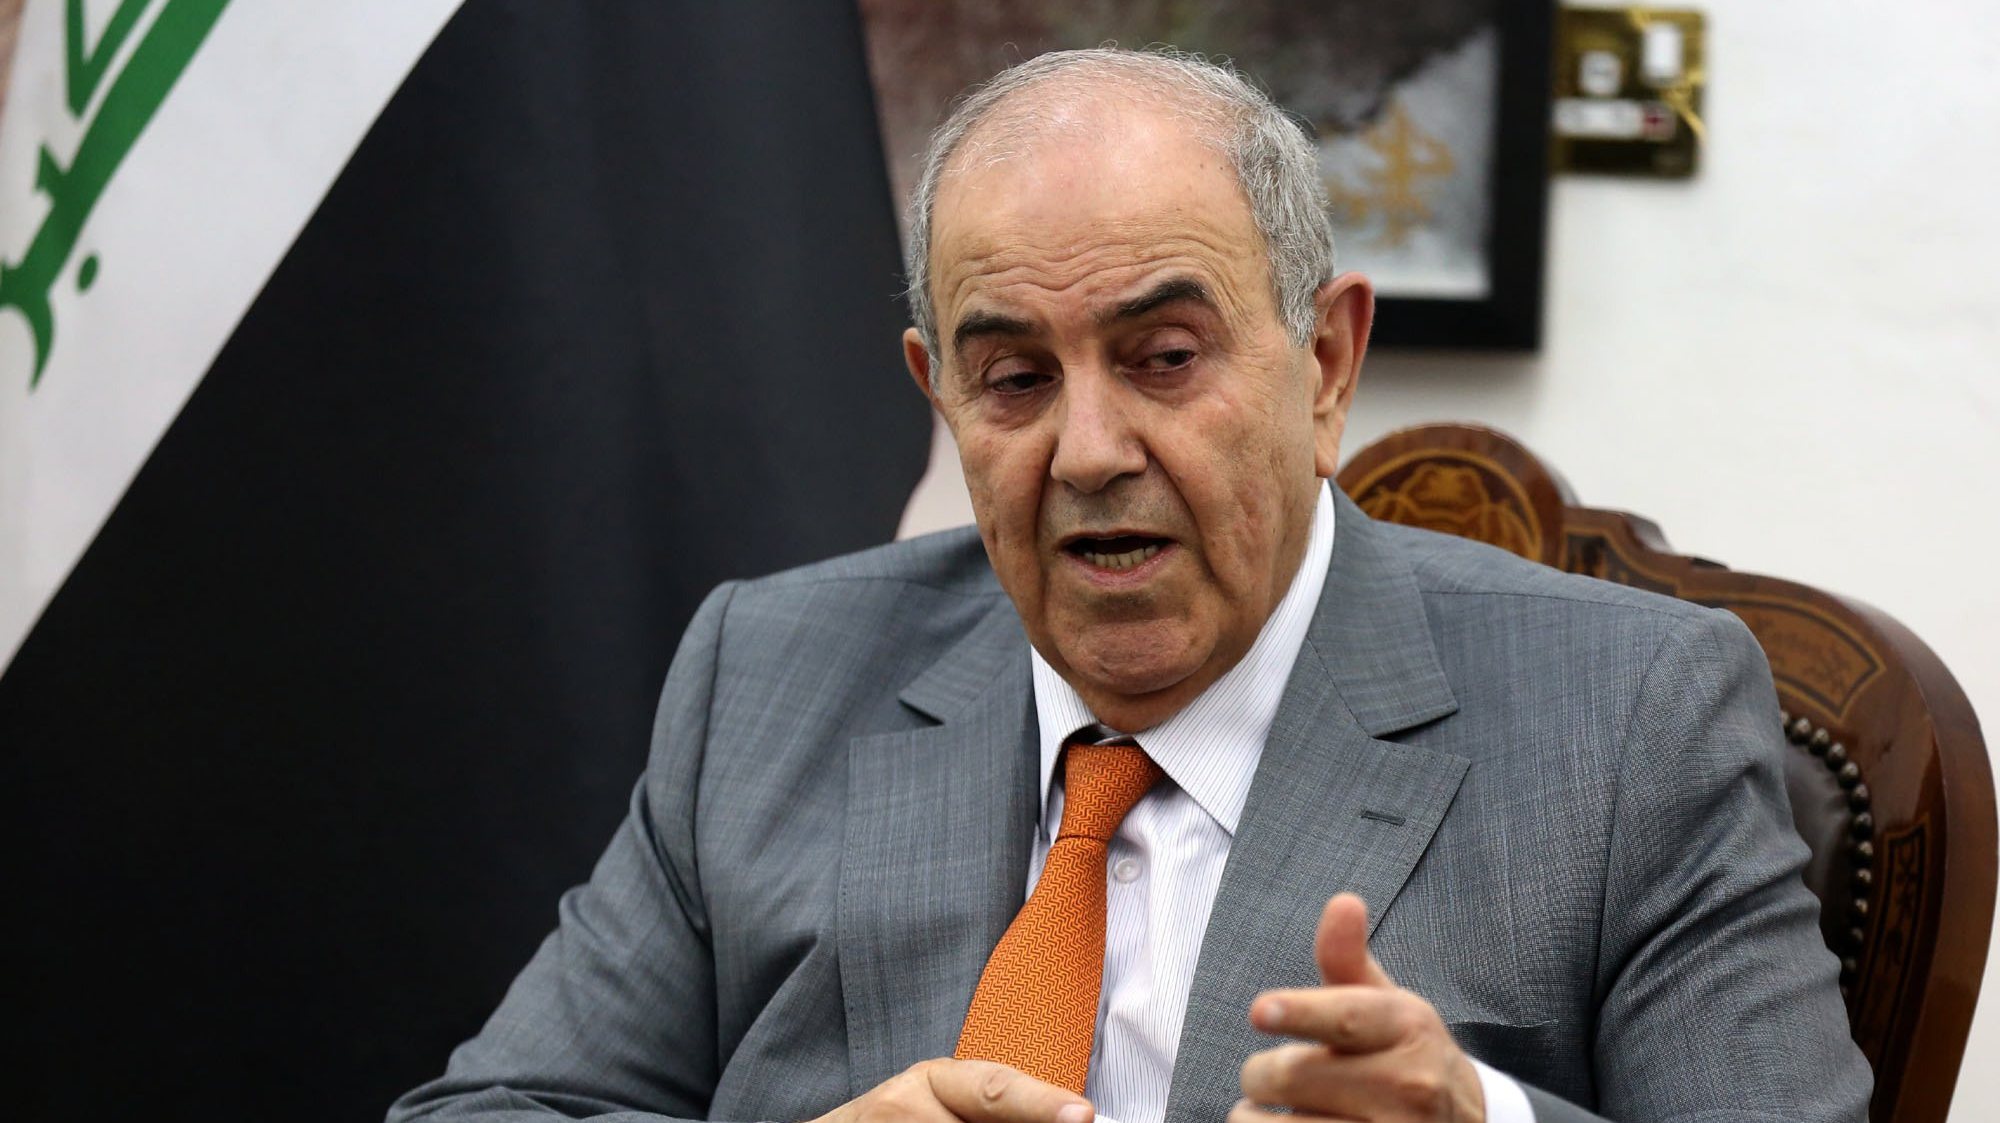 epa06688652 Iraqi Vice-President, leader of the Iraqi National Coalition (Al-Wataniya) Ayad Alawi speaks during a press conference at his office in Baghdad, Iraq, 23 April 2018 (issued 24 April 2018). According to local sources, Allawi called for fair elections in the upcoming parliamentary vote scheduled on 12 May 2018 and urged the Iraqi people to participate in the voting.  EPA/ALI ABBAS